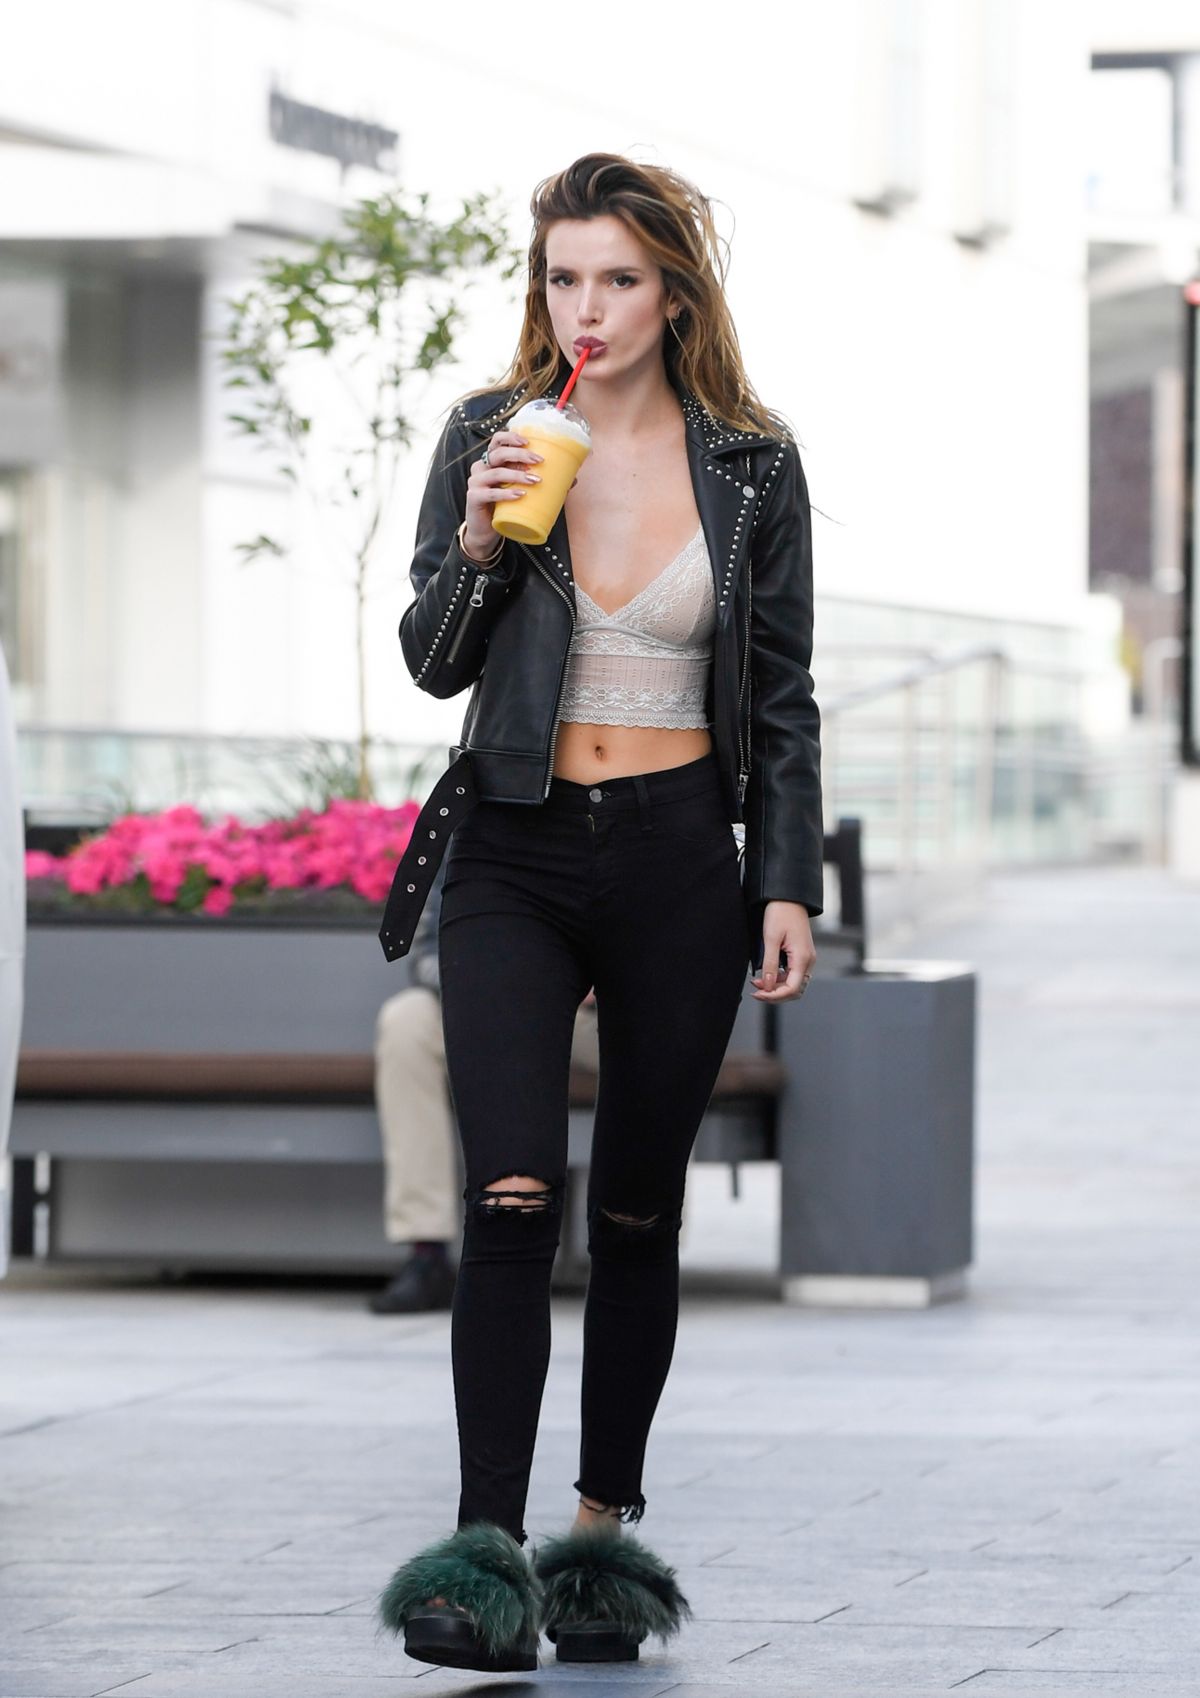 bella-thorne-out-and-about-in-los-angeles-06-14-2016_14.jpg